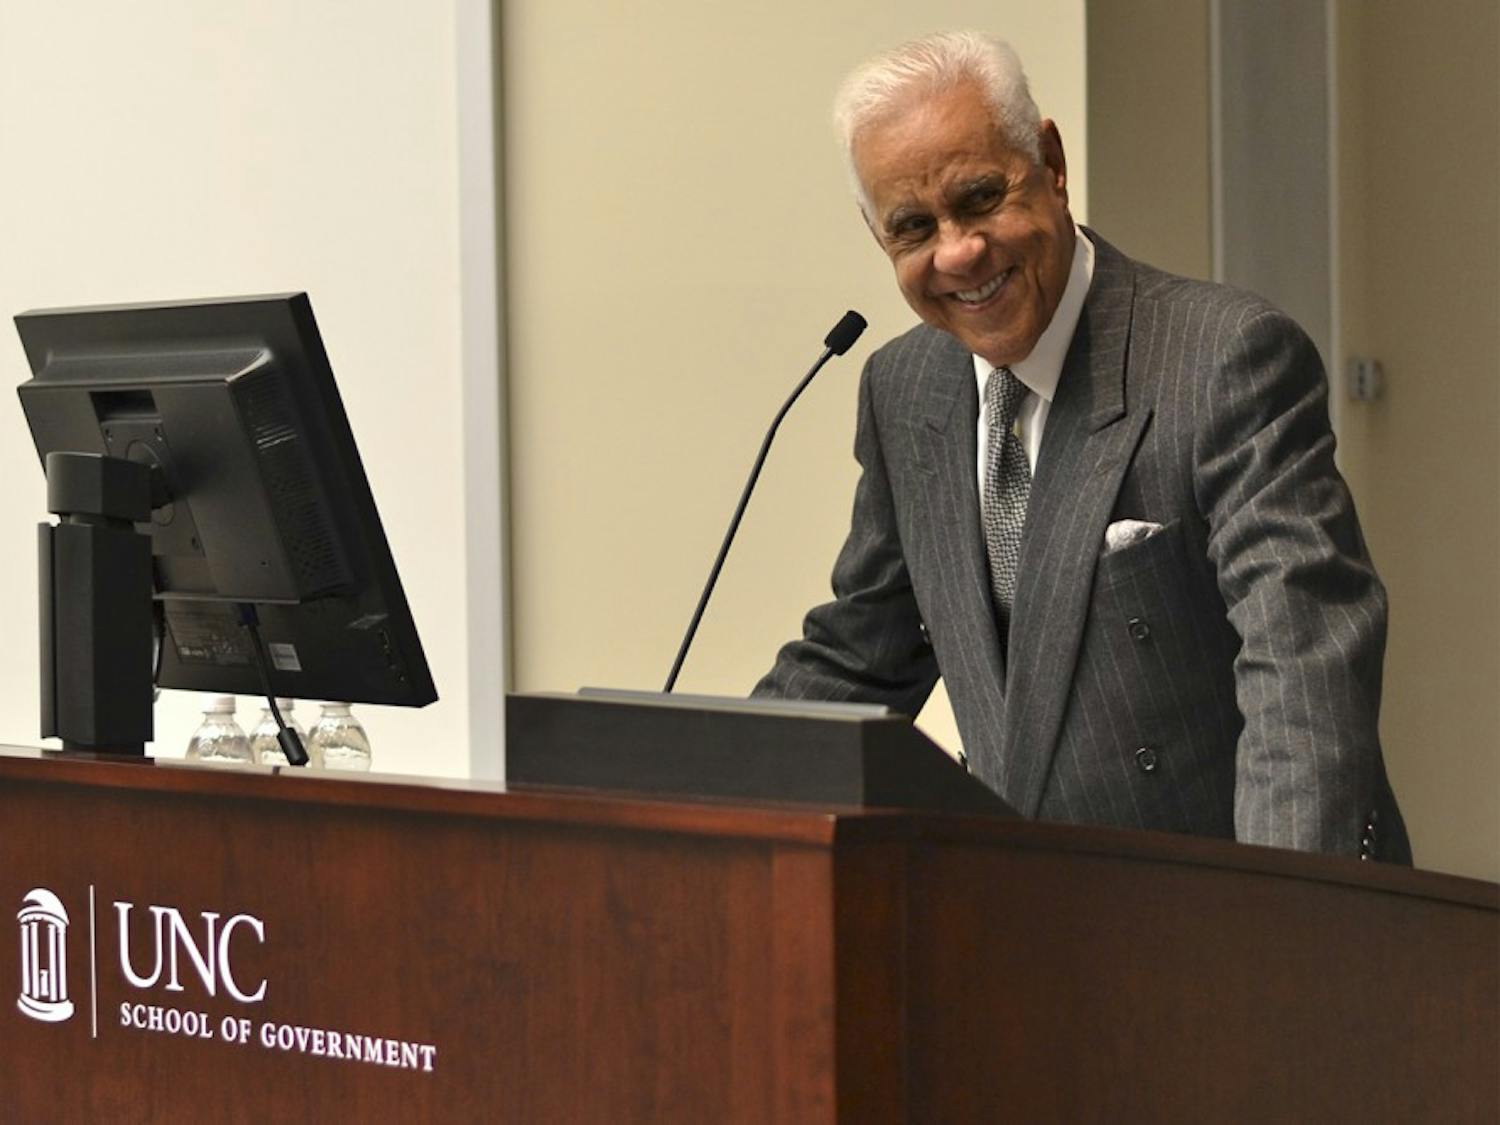 Guest speaker L. Douglas Wilder, the first African American to be nominated governor in Virginia, spoke about the importance of voting at the 2014 Deil S. Wright Lecture Thursday at the UNC School of Government. "We should be talking about voting on a regular basis," Wilder said.